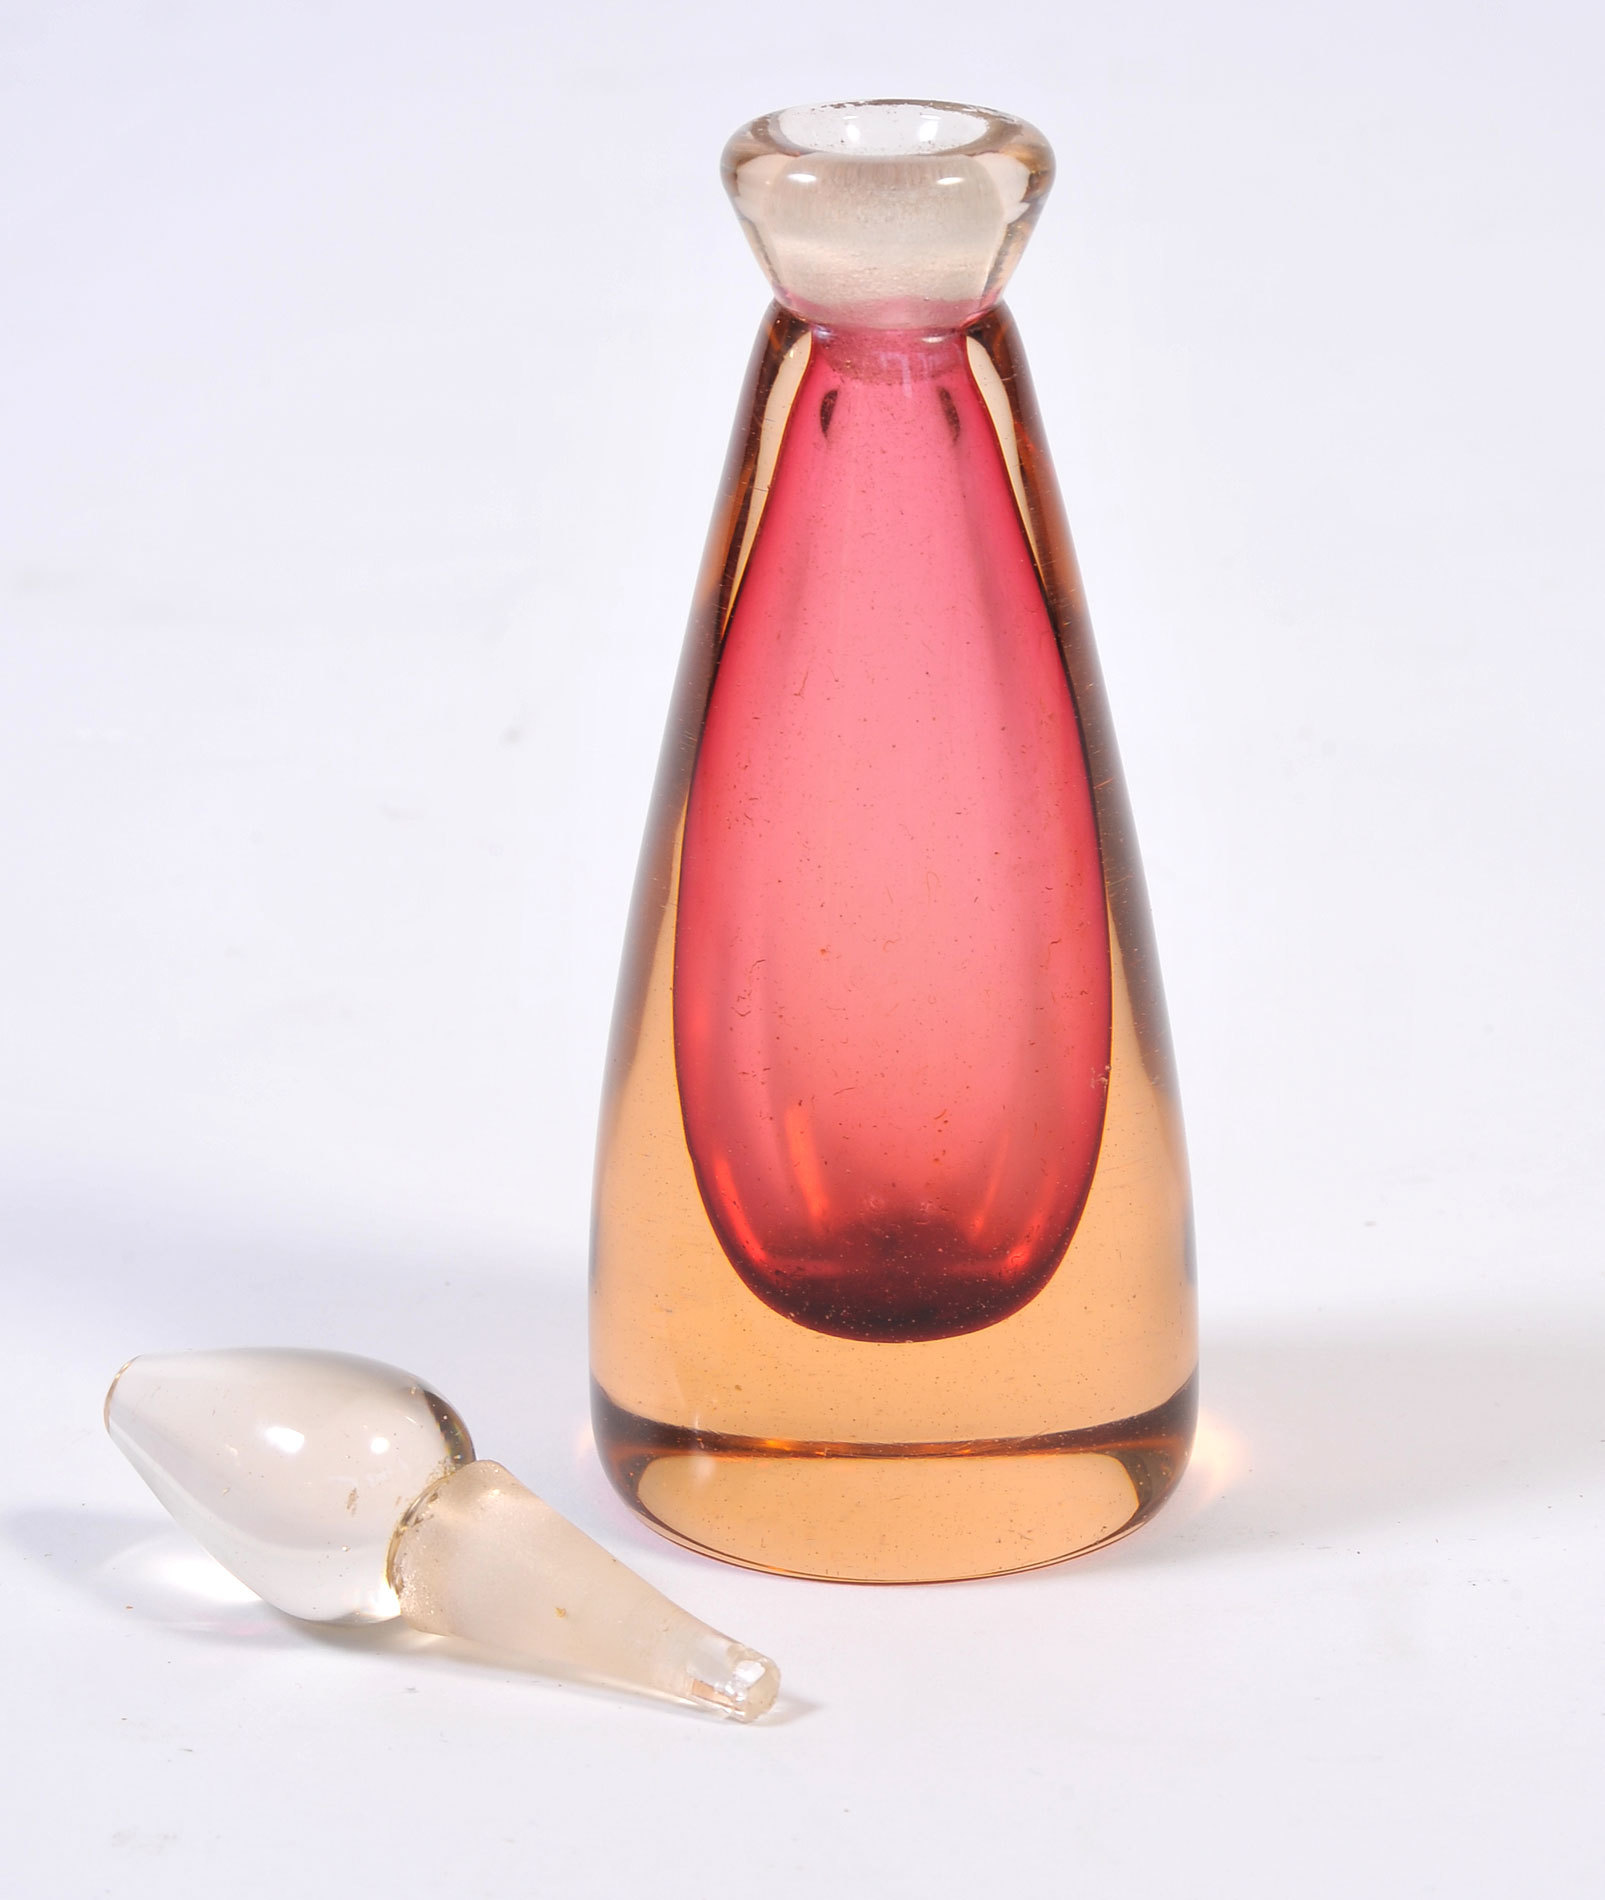 The image for Scent Bottle Pink Yellow 02